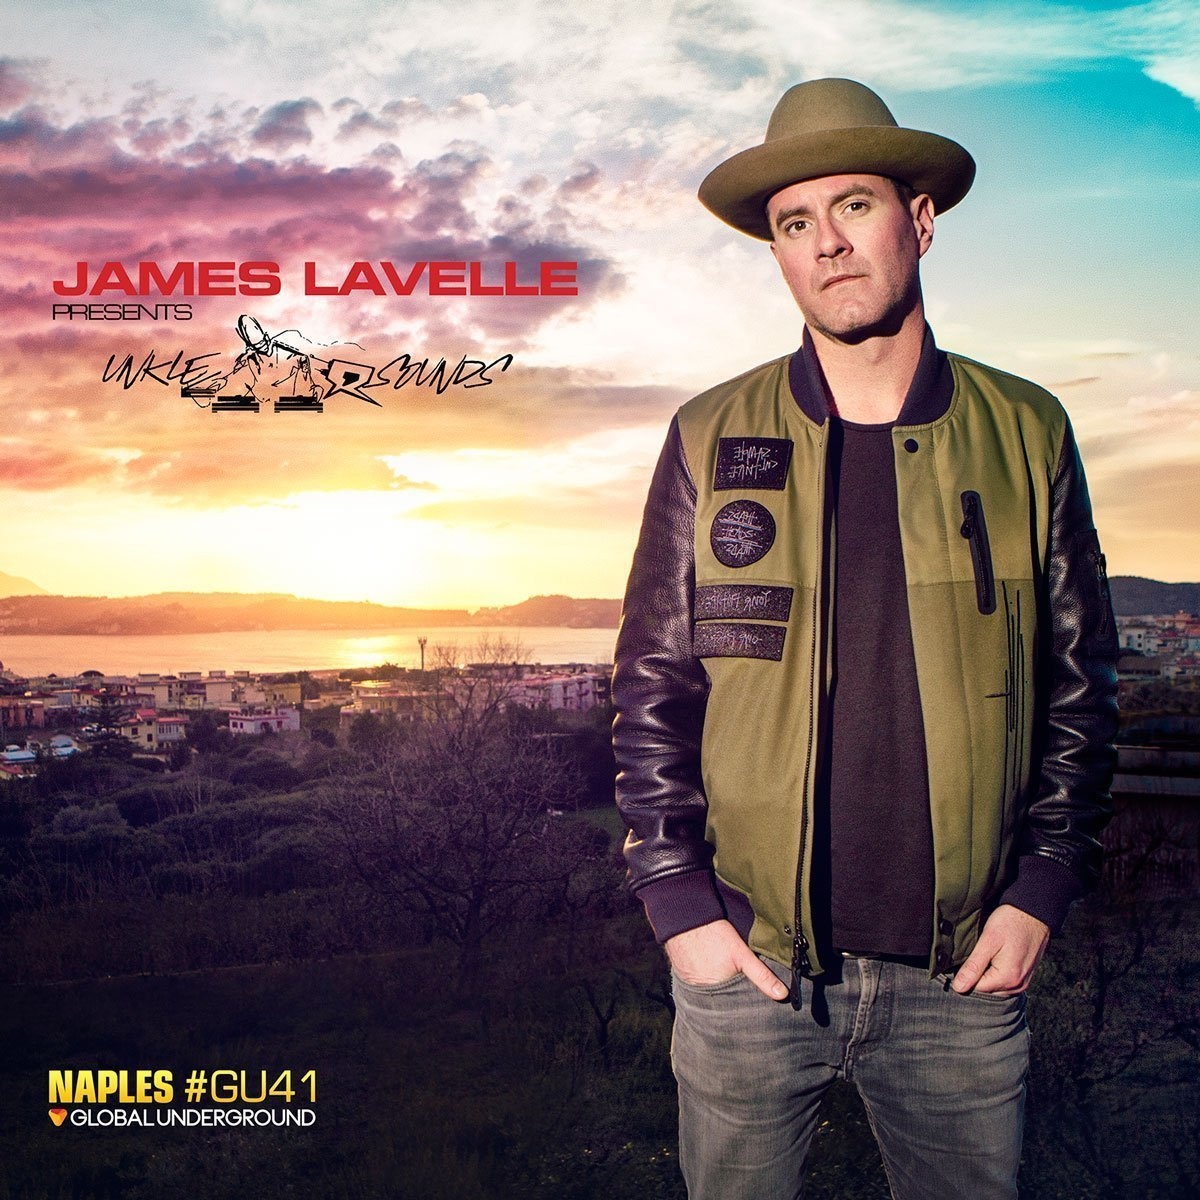 James Lavelle Presents Unklesounds (2 CDs) - Various. (CD)